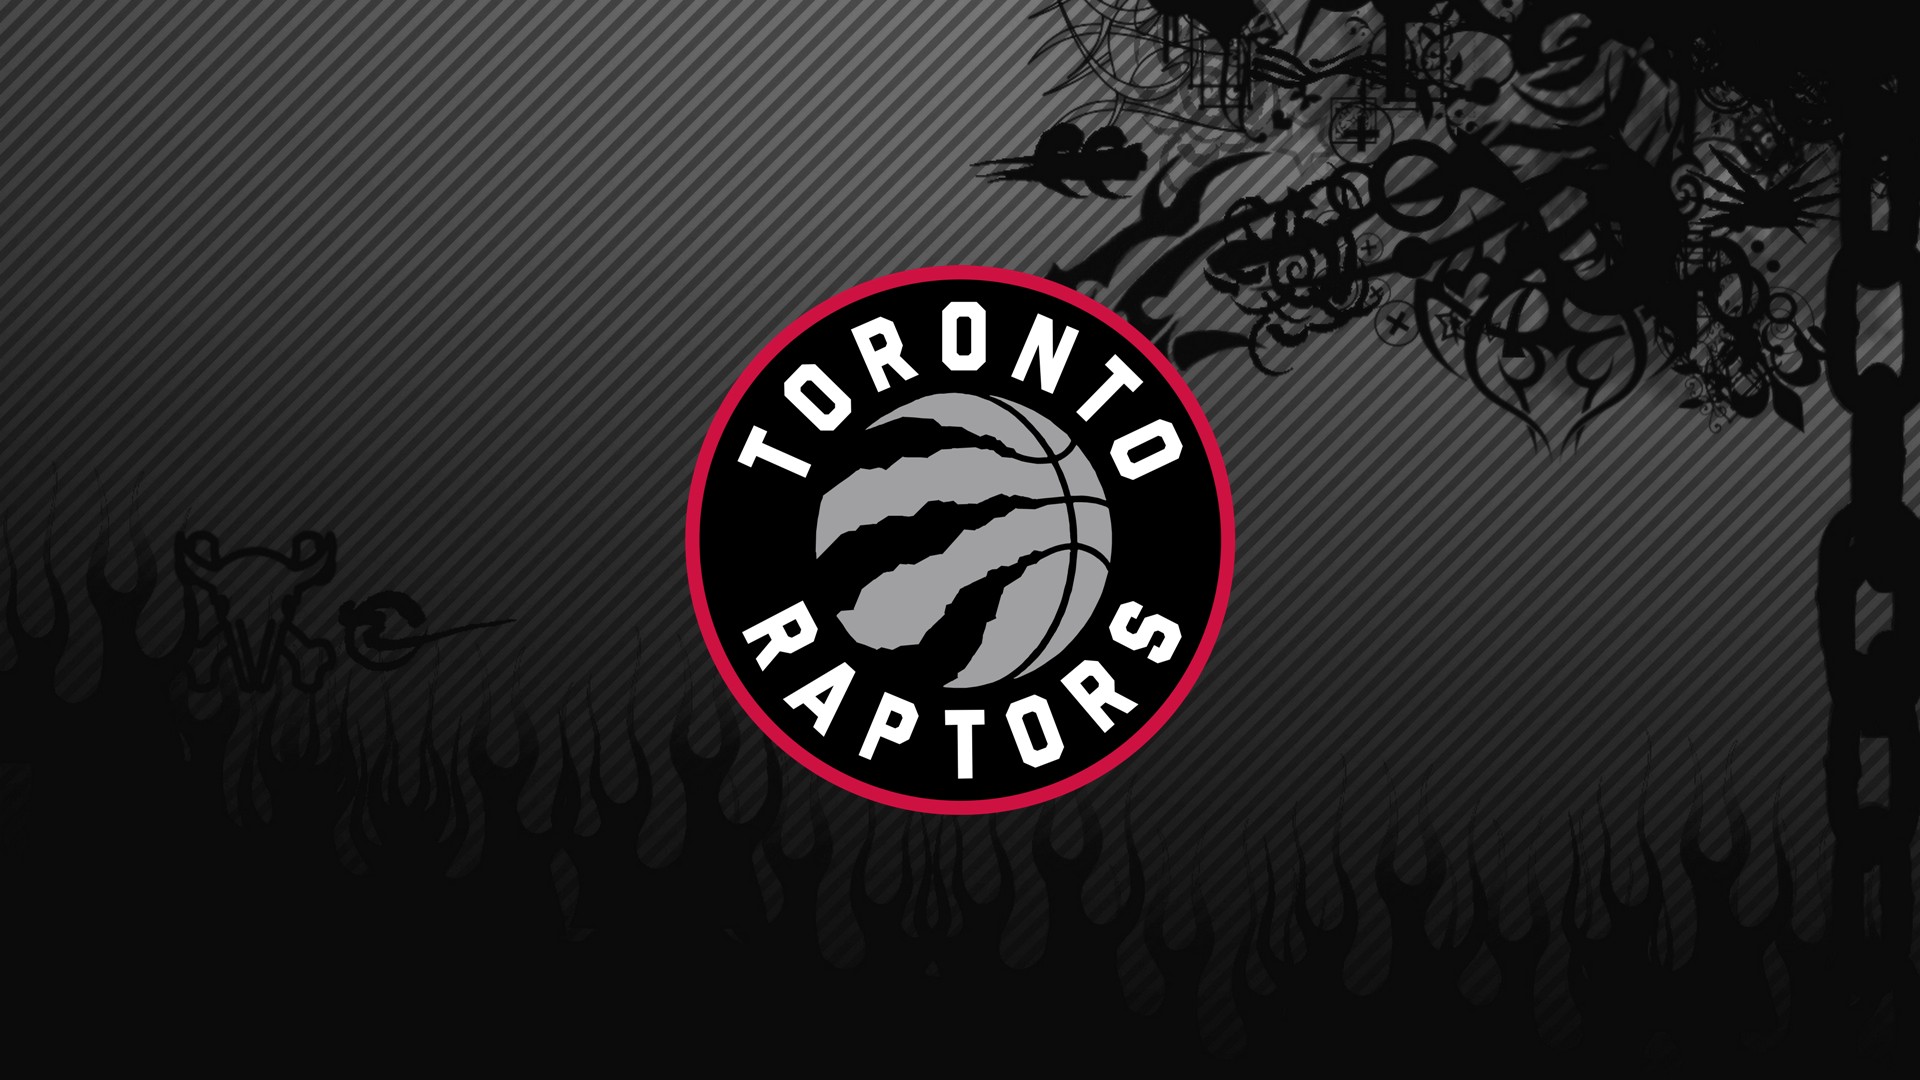 Toronto Raptors Logo For Mac Wallpaper with high-resolution 1920x1080 pixel. You can use this wallpaper for your Desktop Computer Backgrounds, Windows or Mac Screensavers, iPhone Lock screen, Tablet or Android and another Mobile Phone device